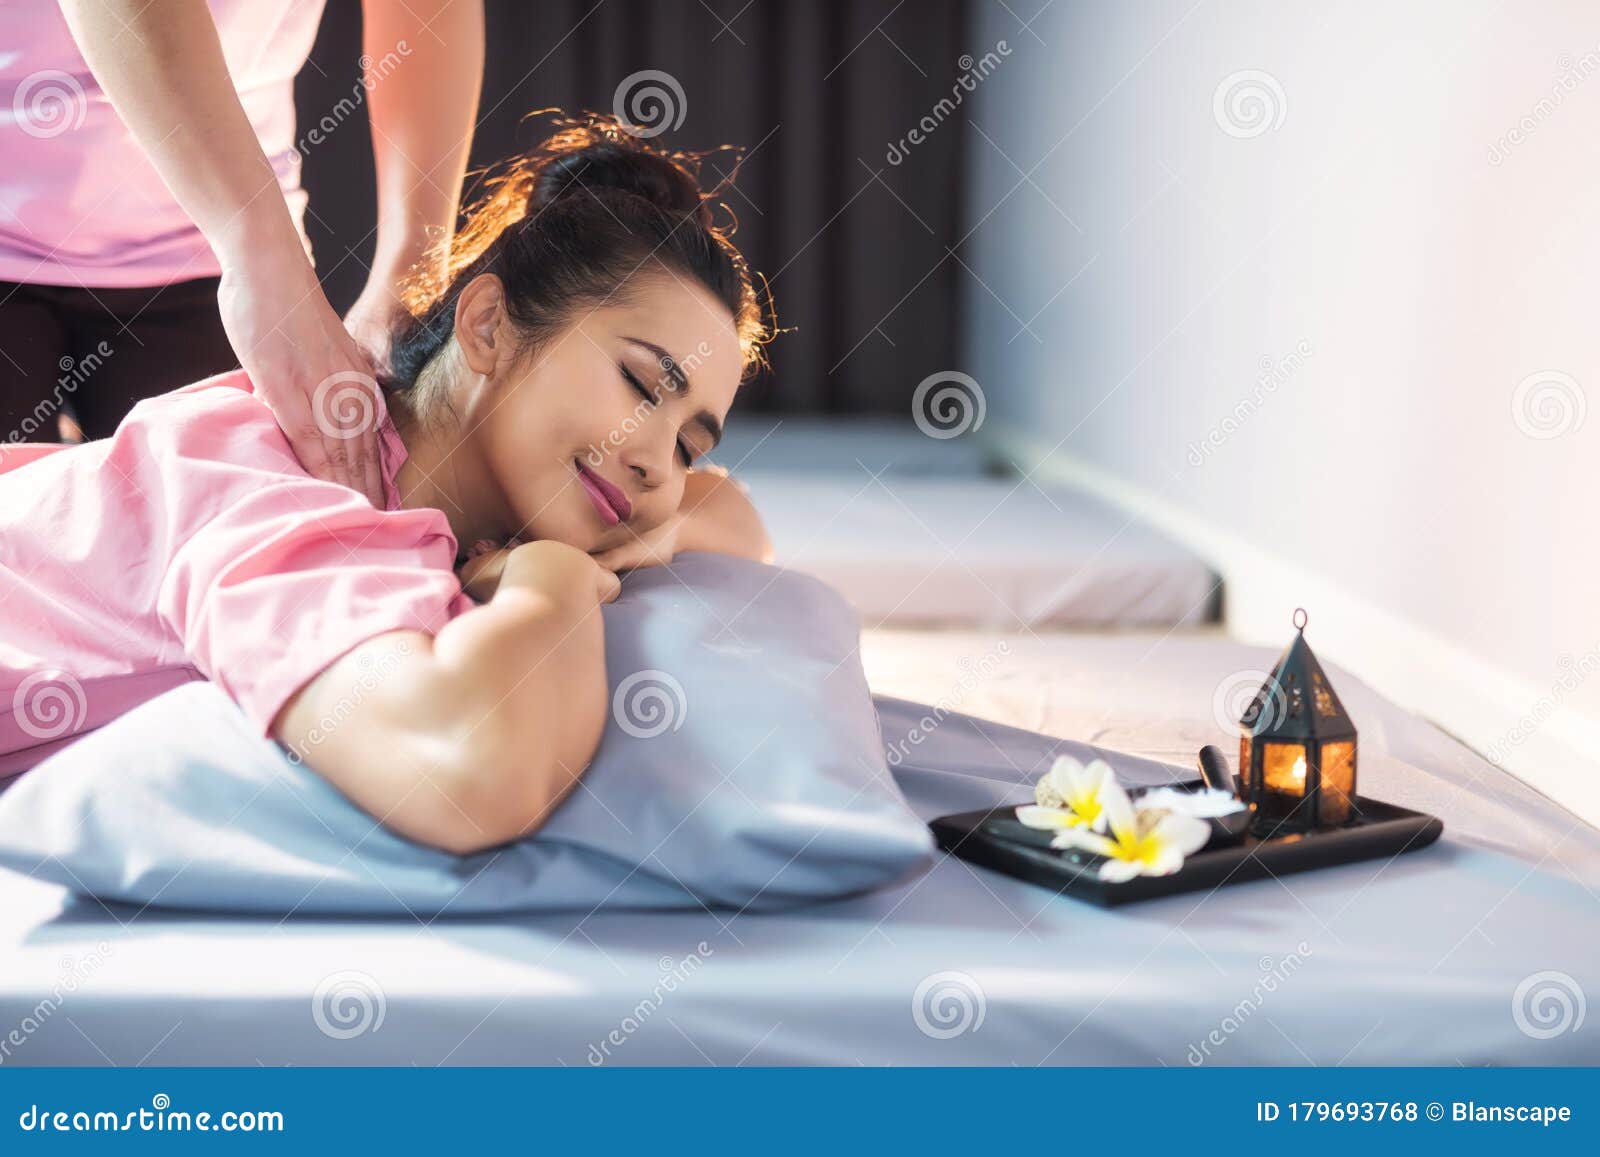 Thai massage on bed in spa stock photo. Image of aroma 179693768